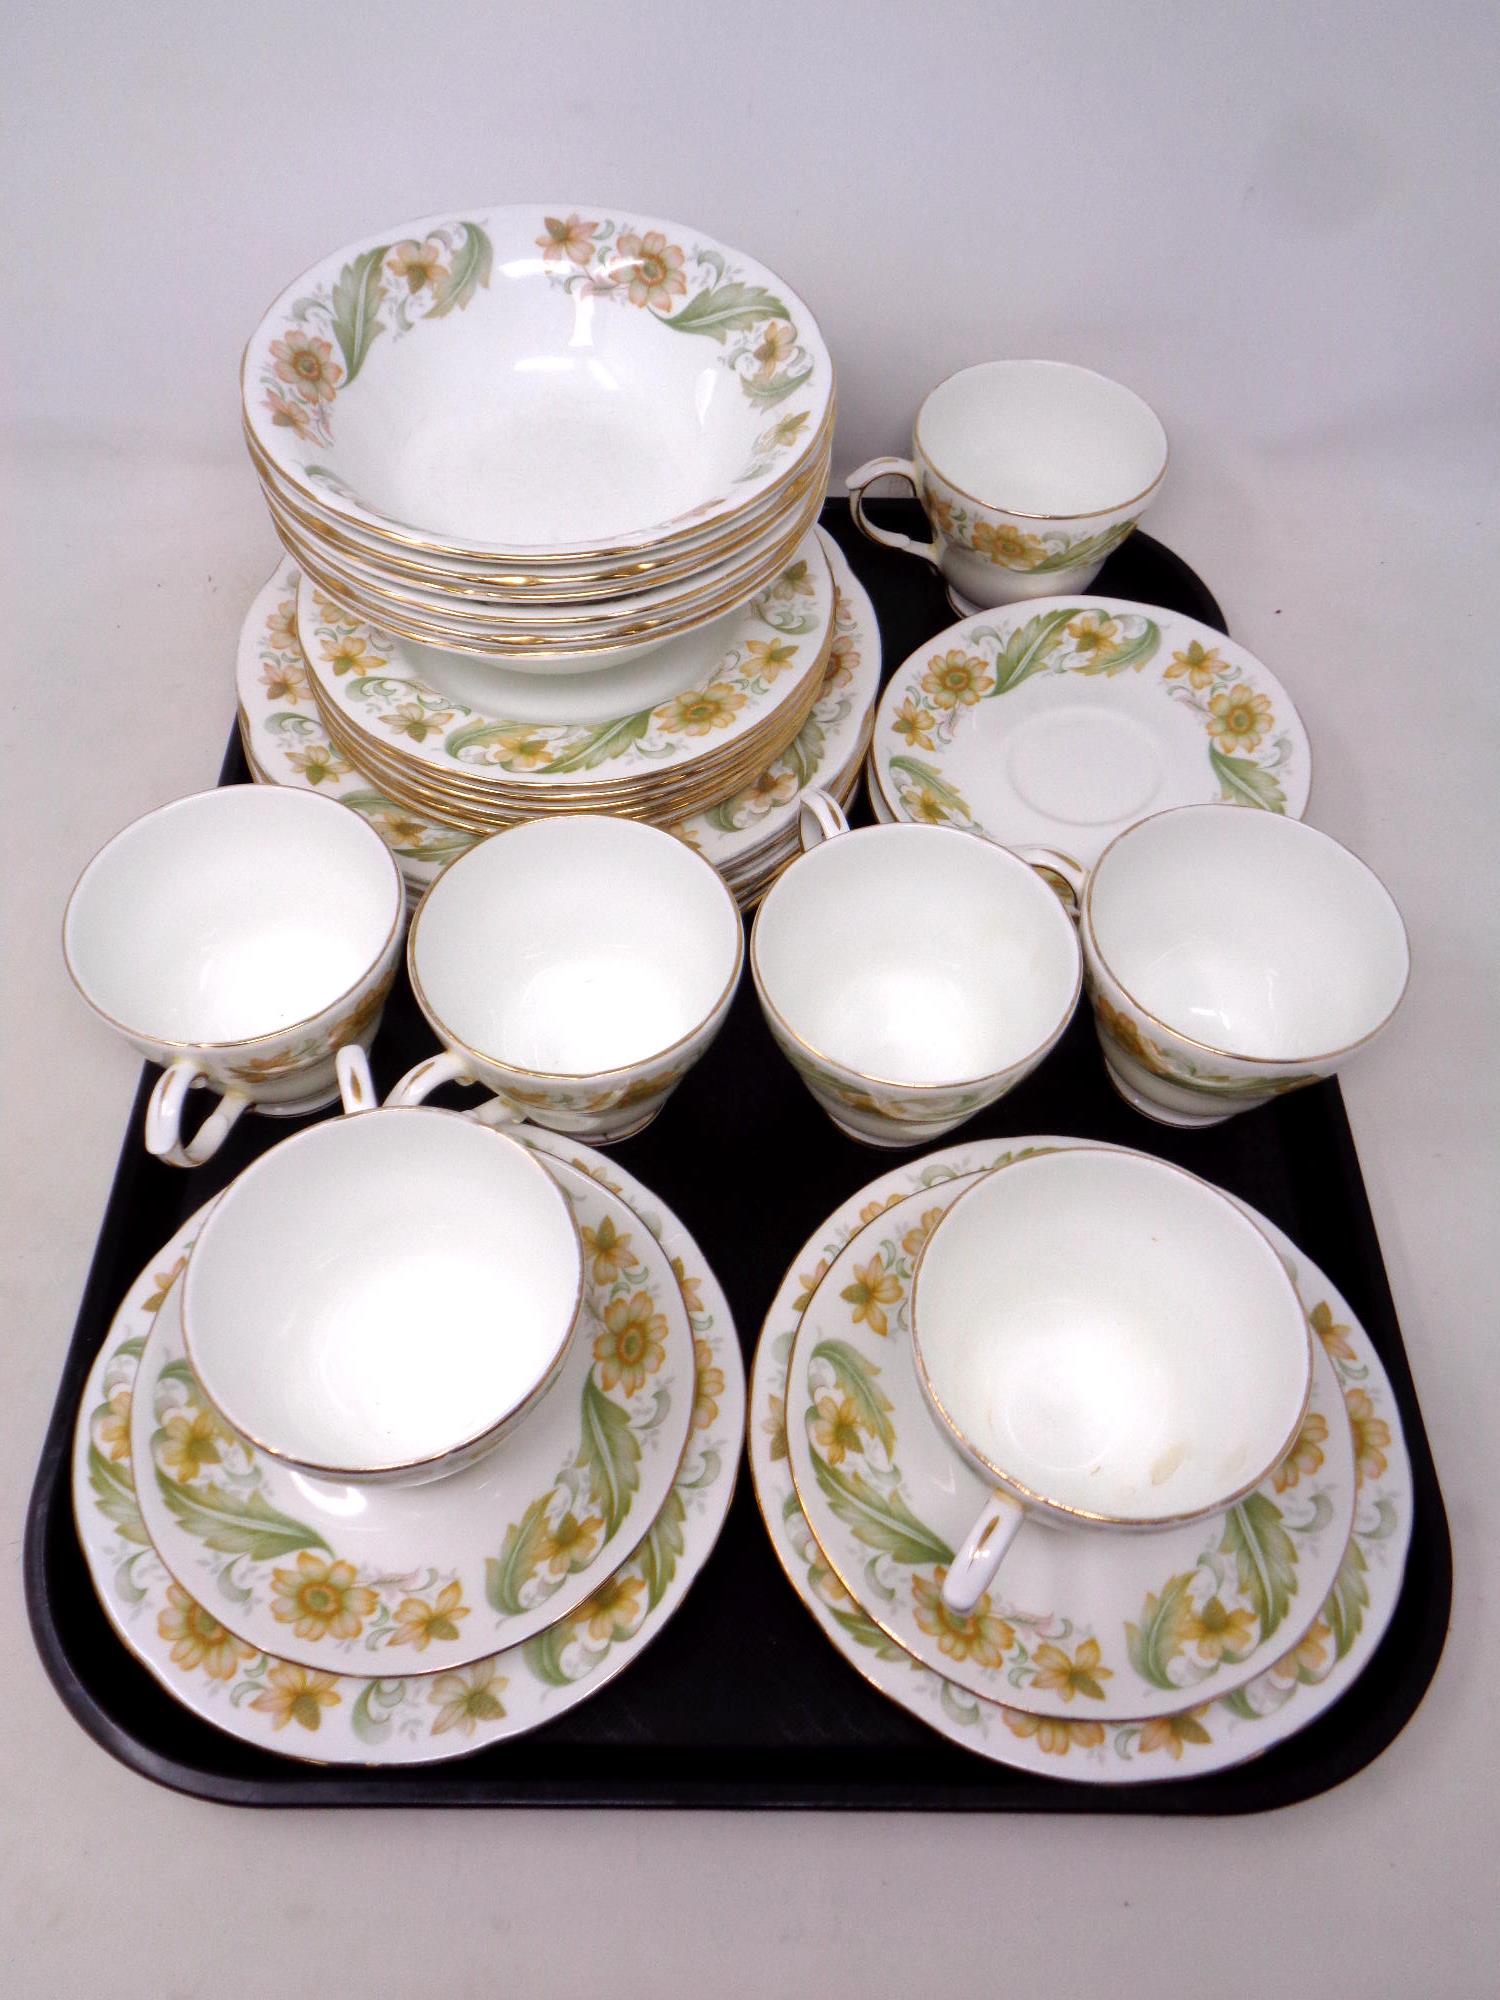 A tray of 32 pieces of Duchess Greensleeves tea and dinner china